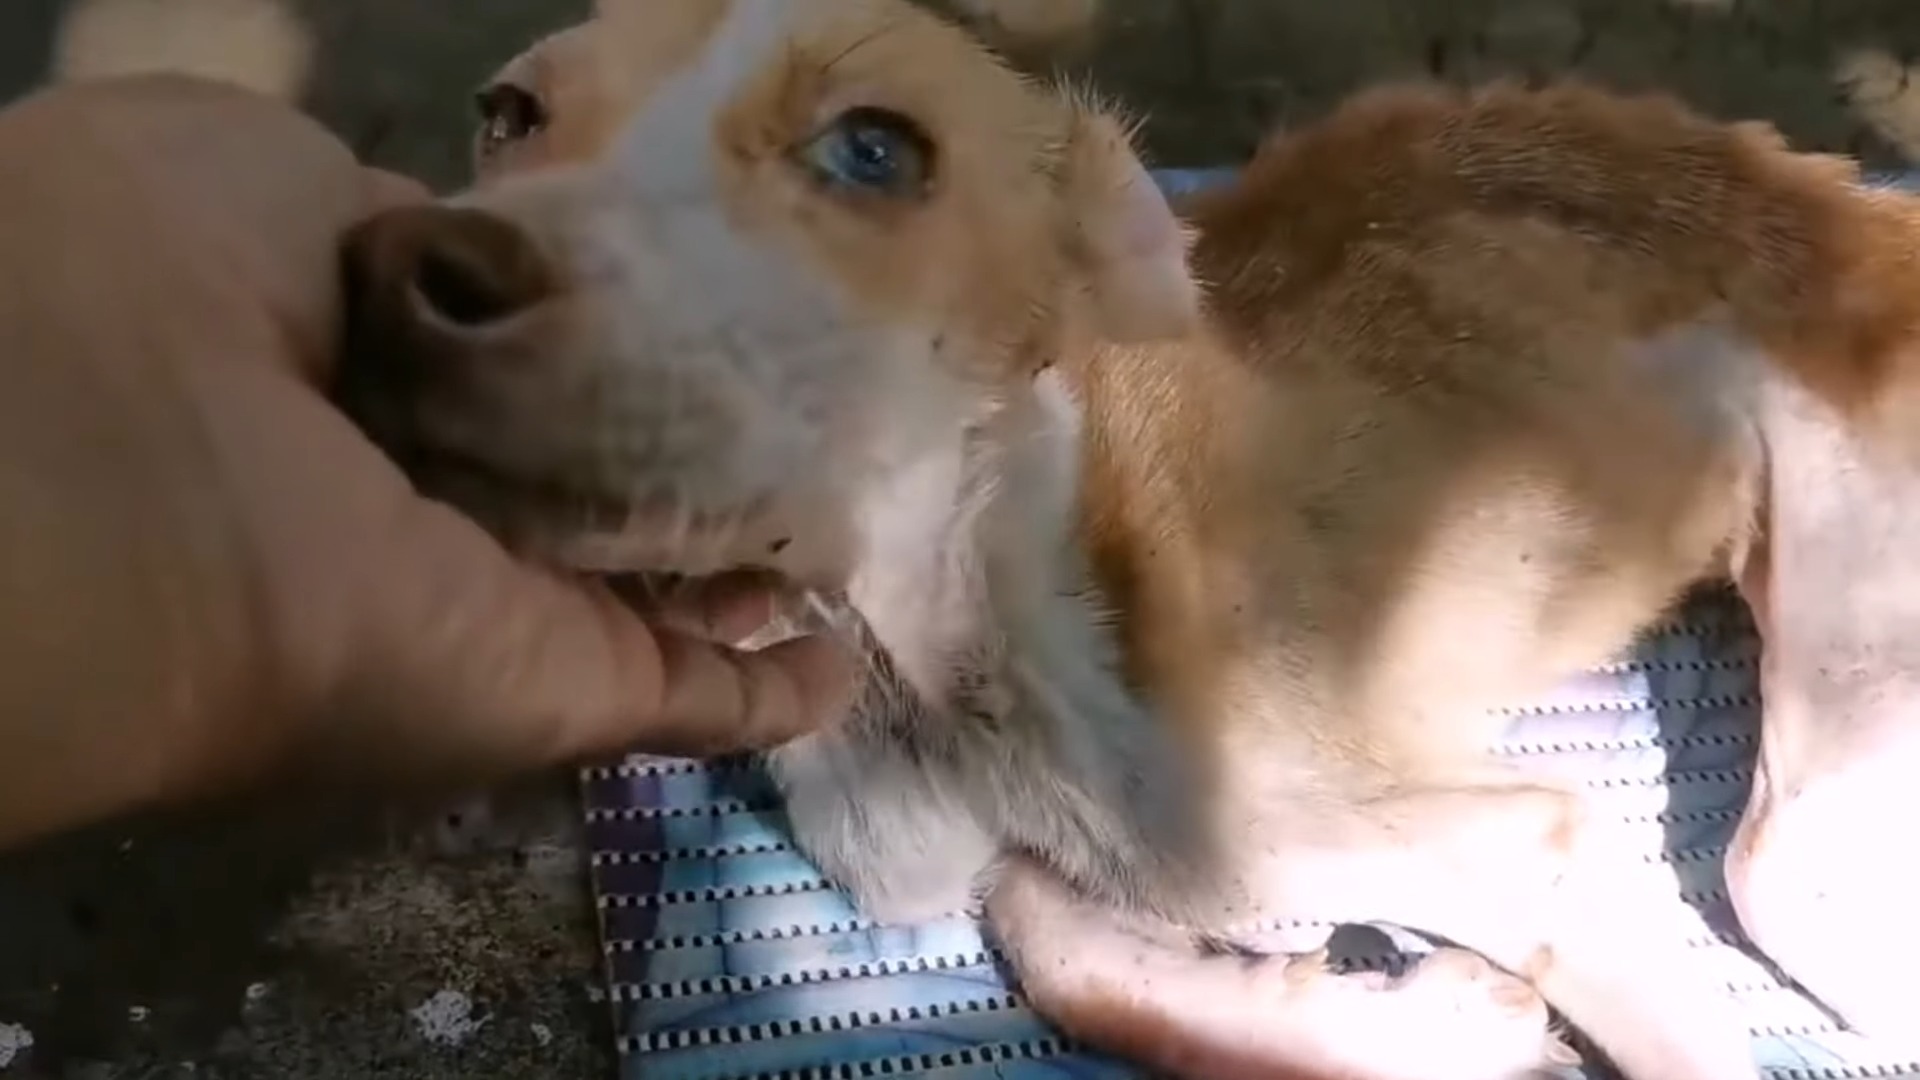 rescuer's hand holding dog's head